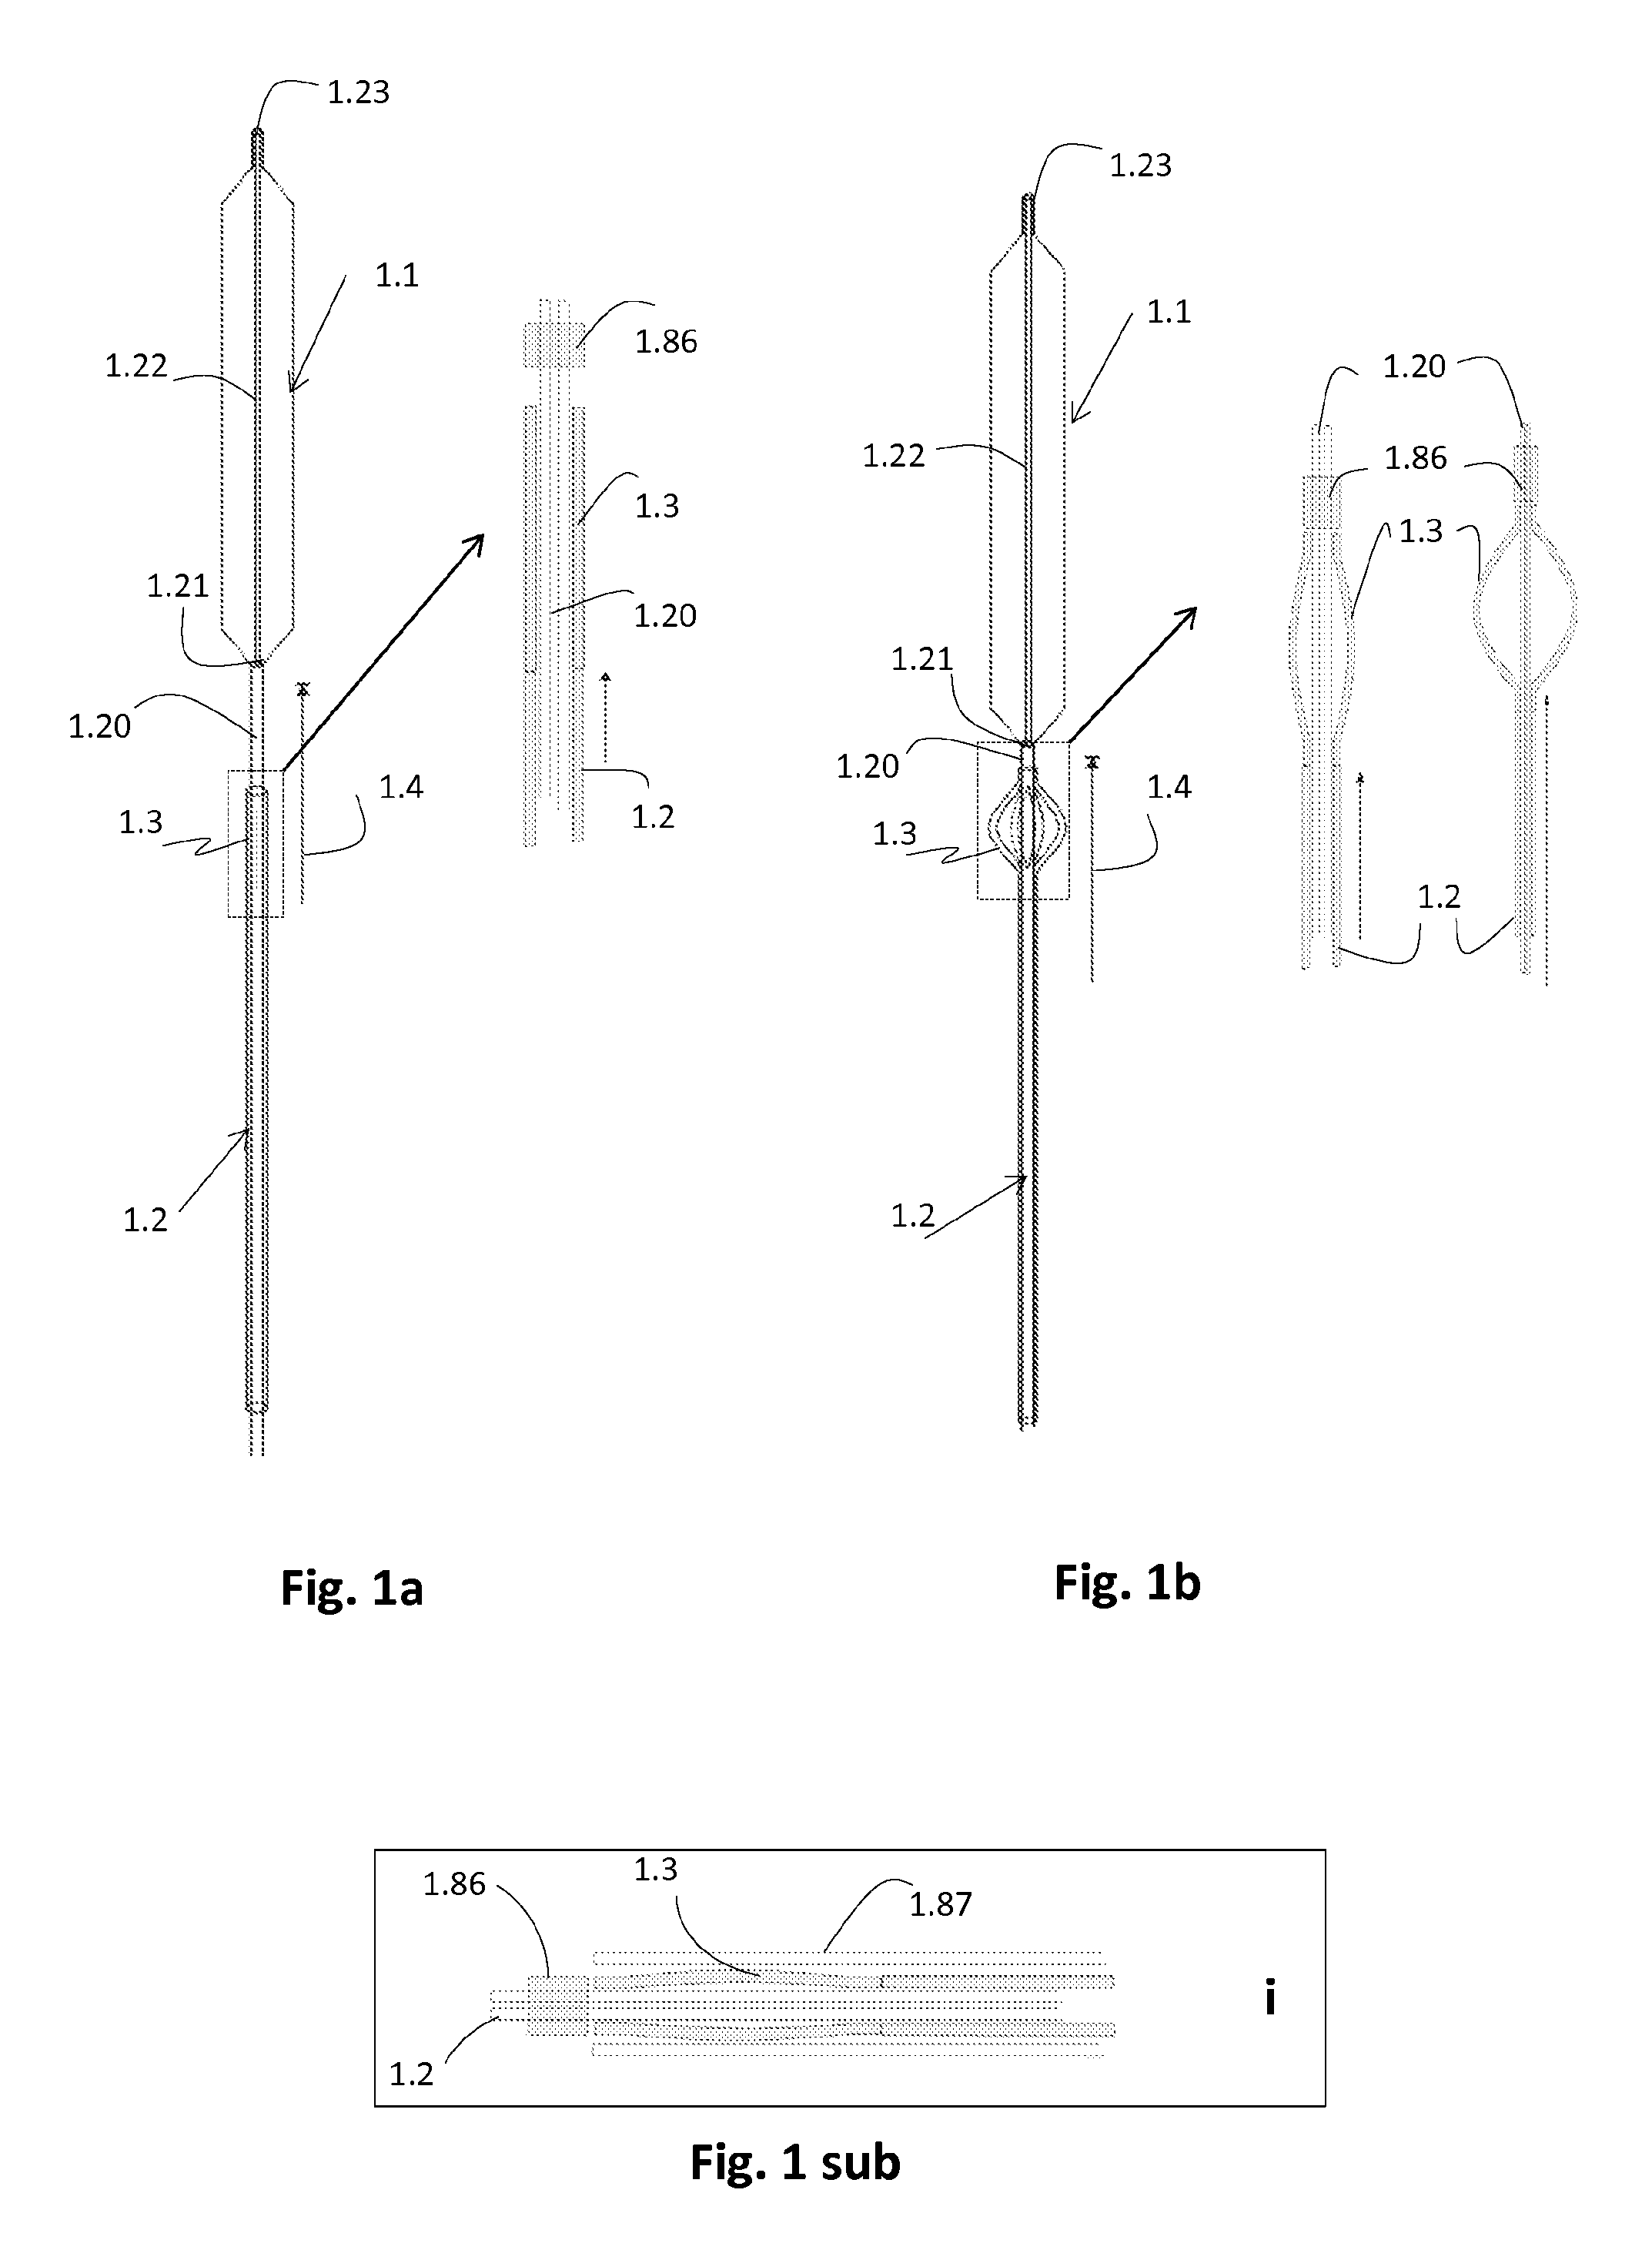 Intra-aortic balloon apparatus, assist devices and methods for improving flow, counterpulsation and haemodynamics